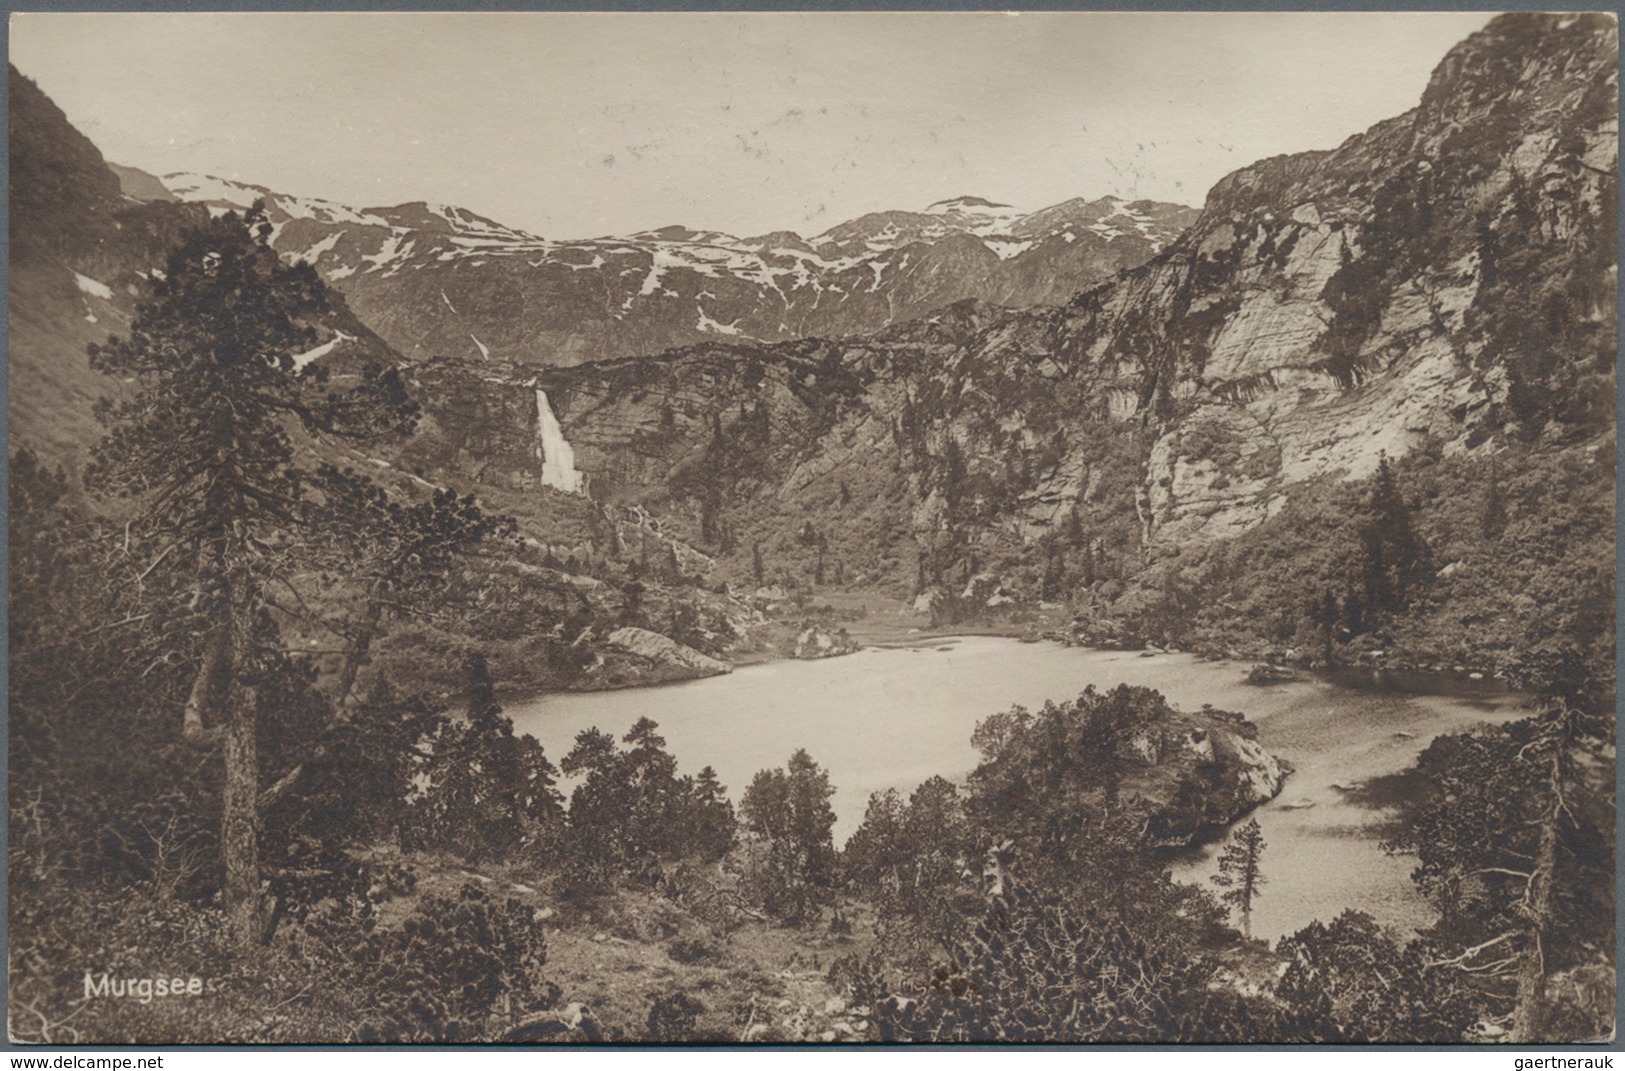 Zeppelinpost Europa: 1929. Murgsee Real Photo RPPC Flown On The Graf Zeppelin LZ127 Airship's 1929 S - Autres - Europe